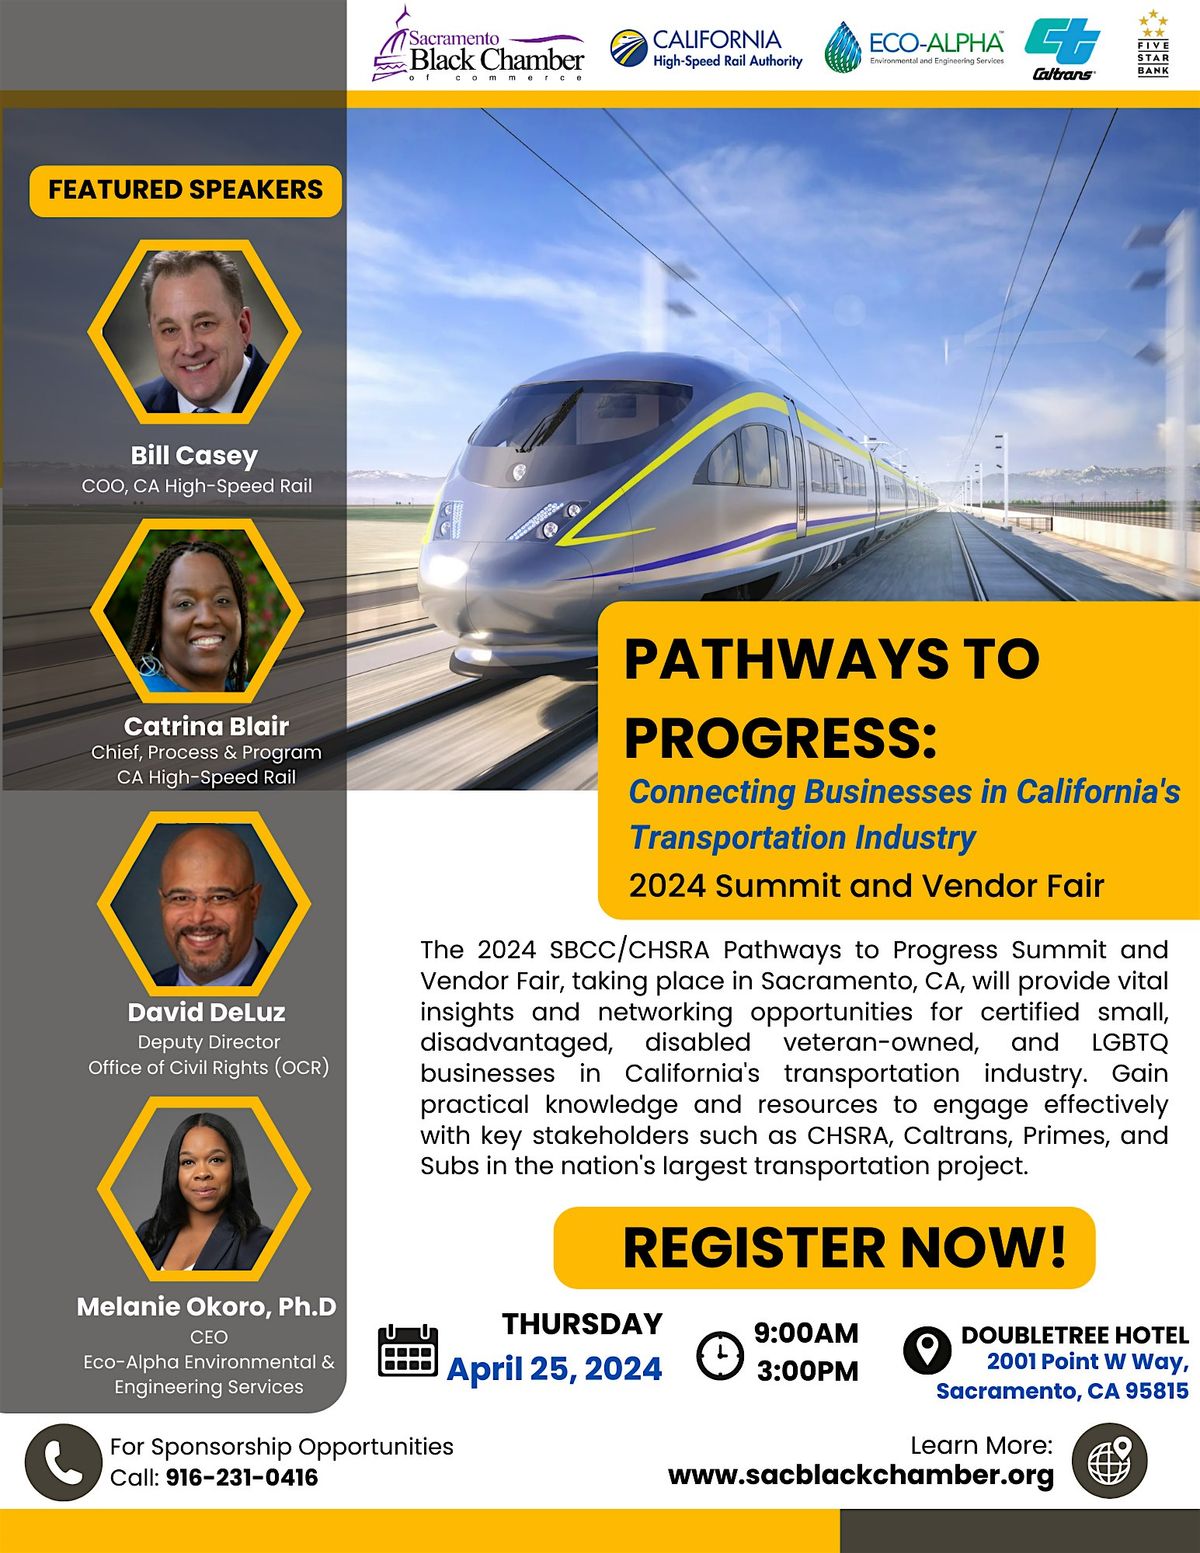 Pathways to Progress: Connecting Businesses in California's Transportation Industry